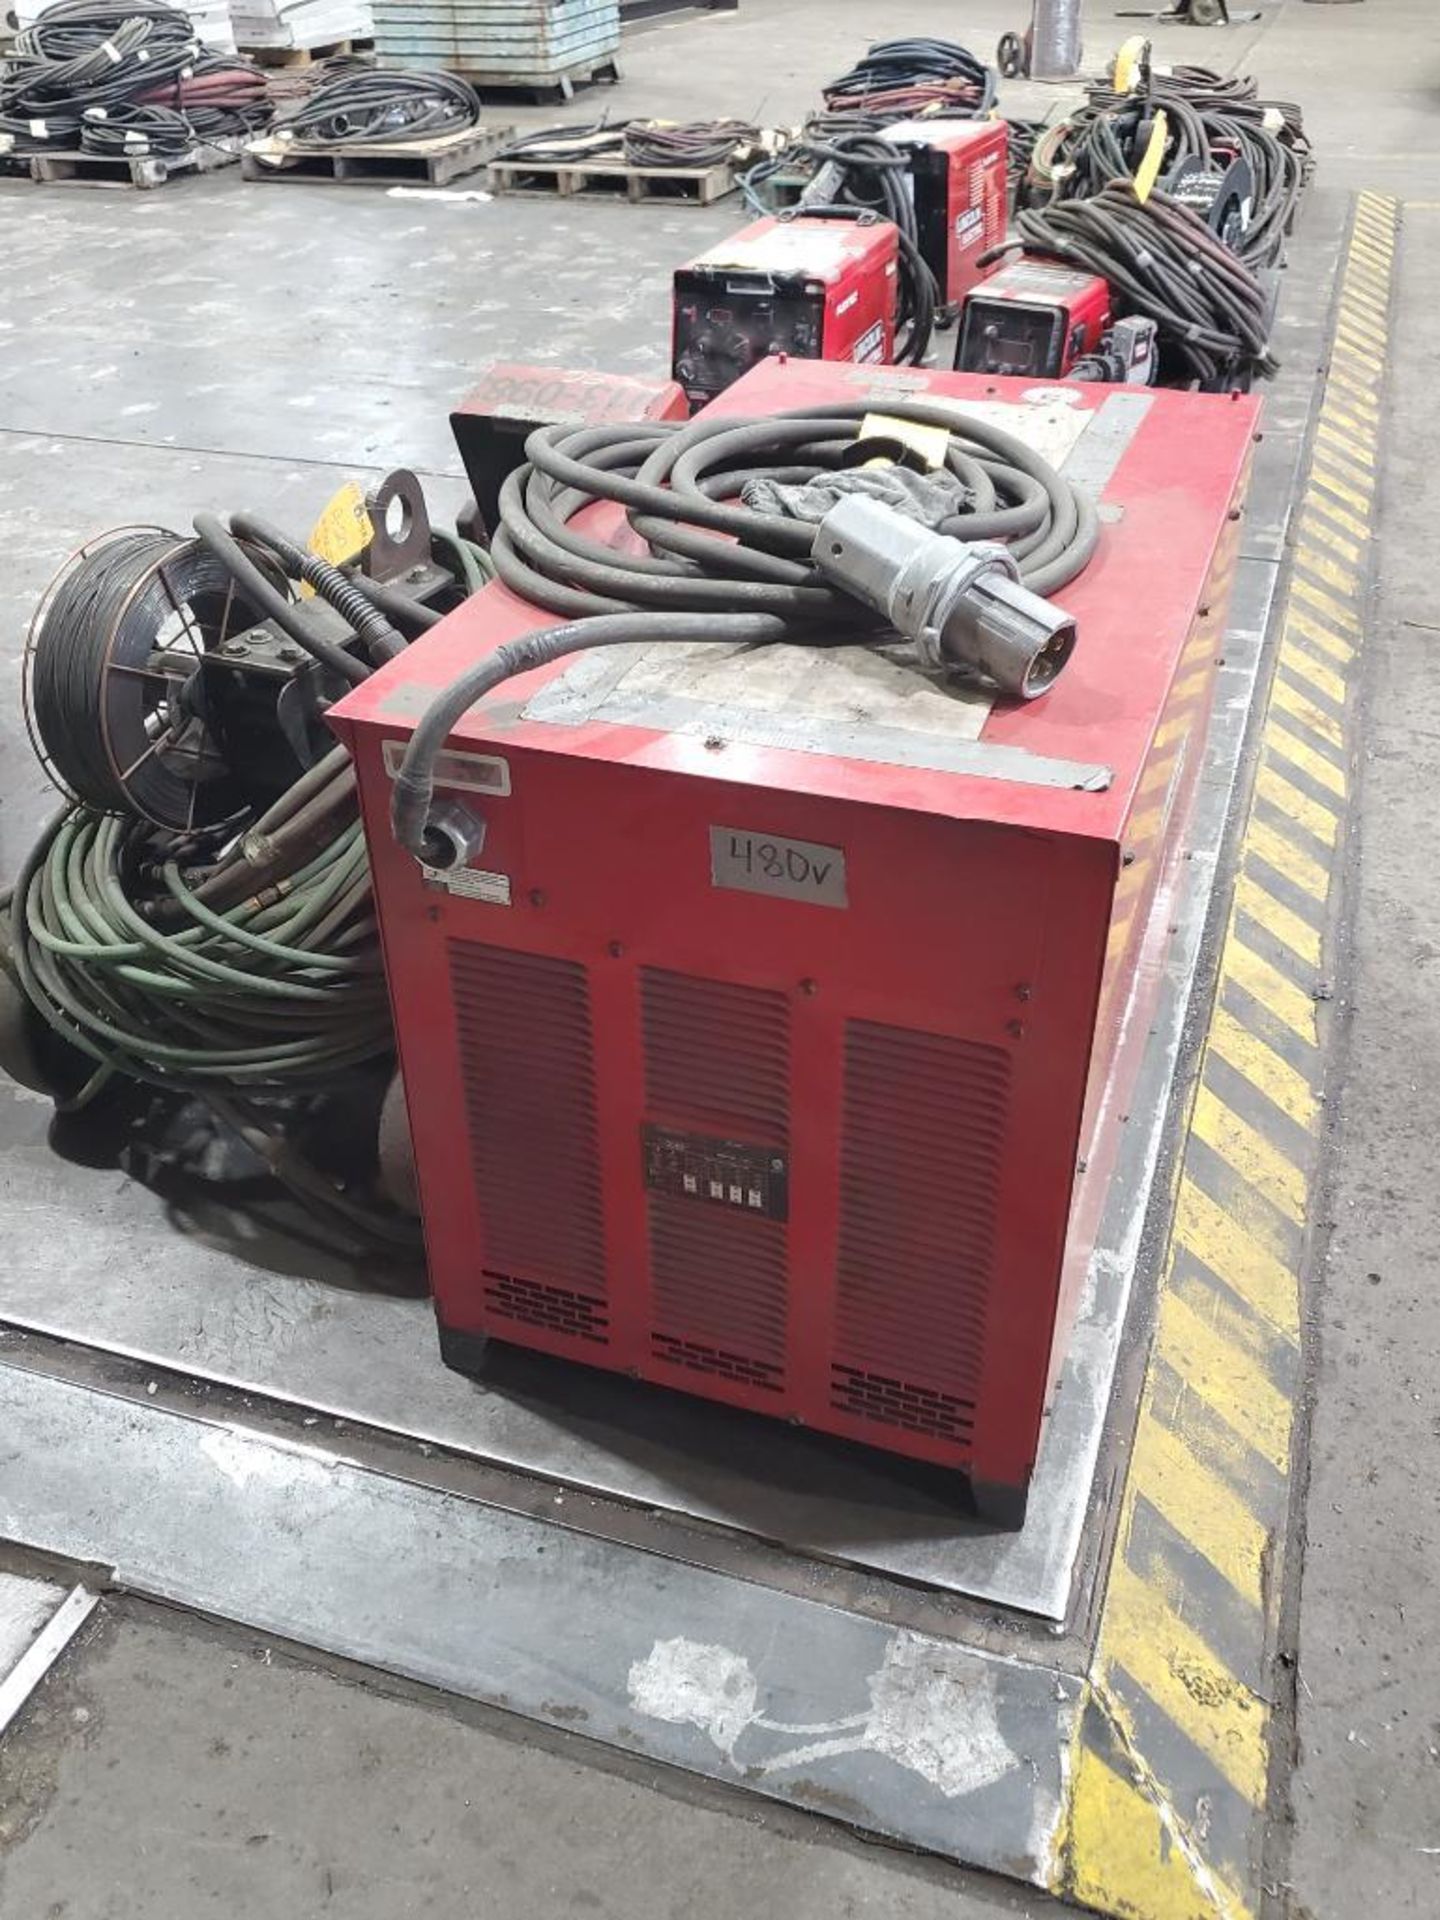 LINCOLN ELECTRIC IDEALARC DC-600 WELDER 230-460V WITH LN-10 WIRE FEED SN.U1121002540 115V - Image 3 of 7